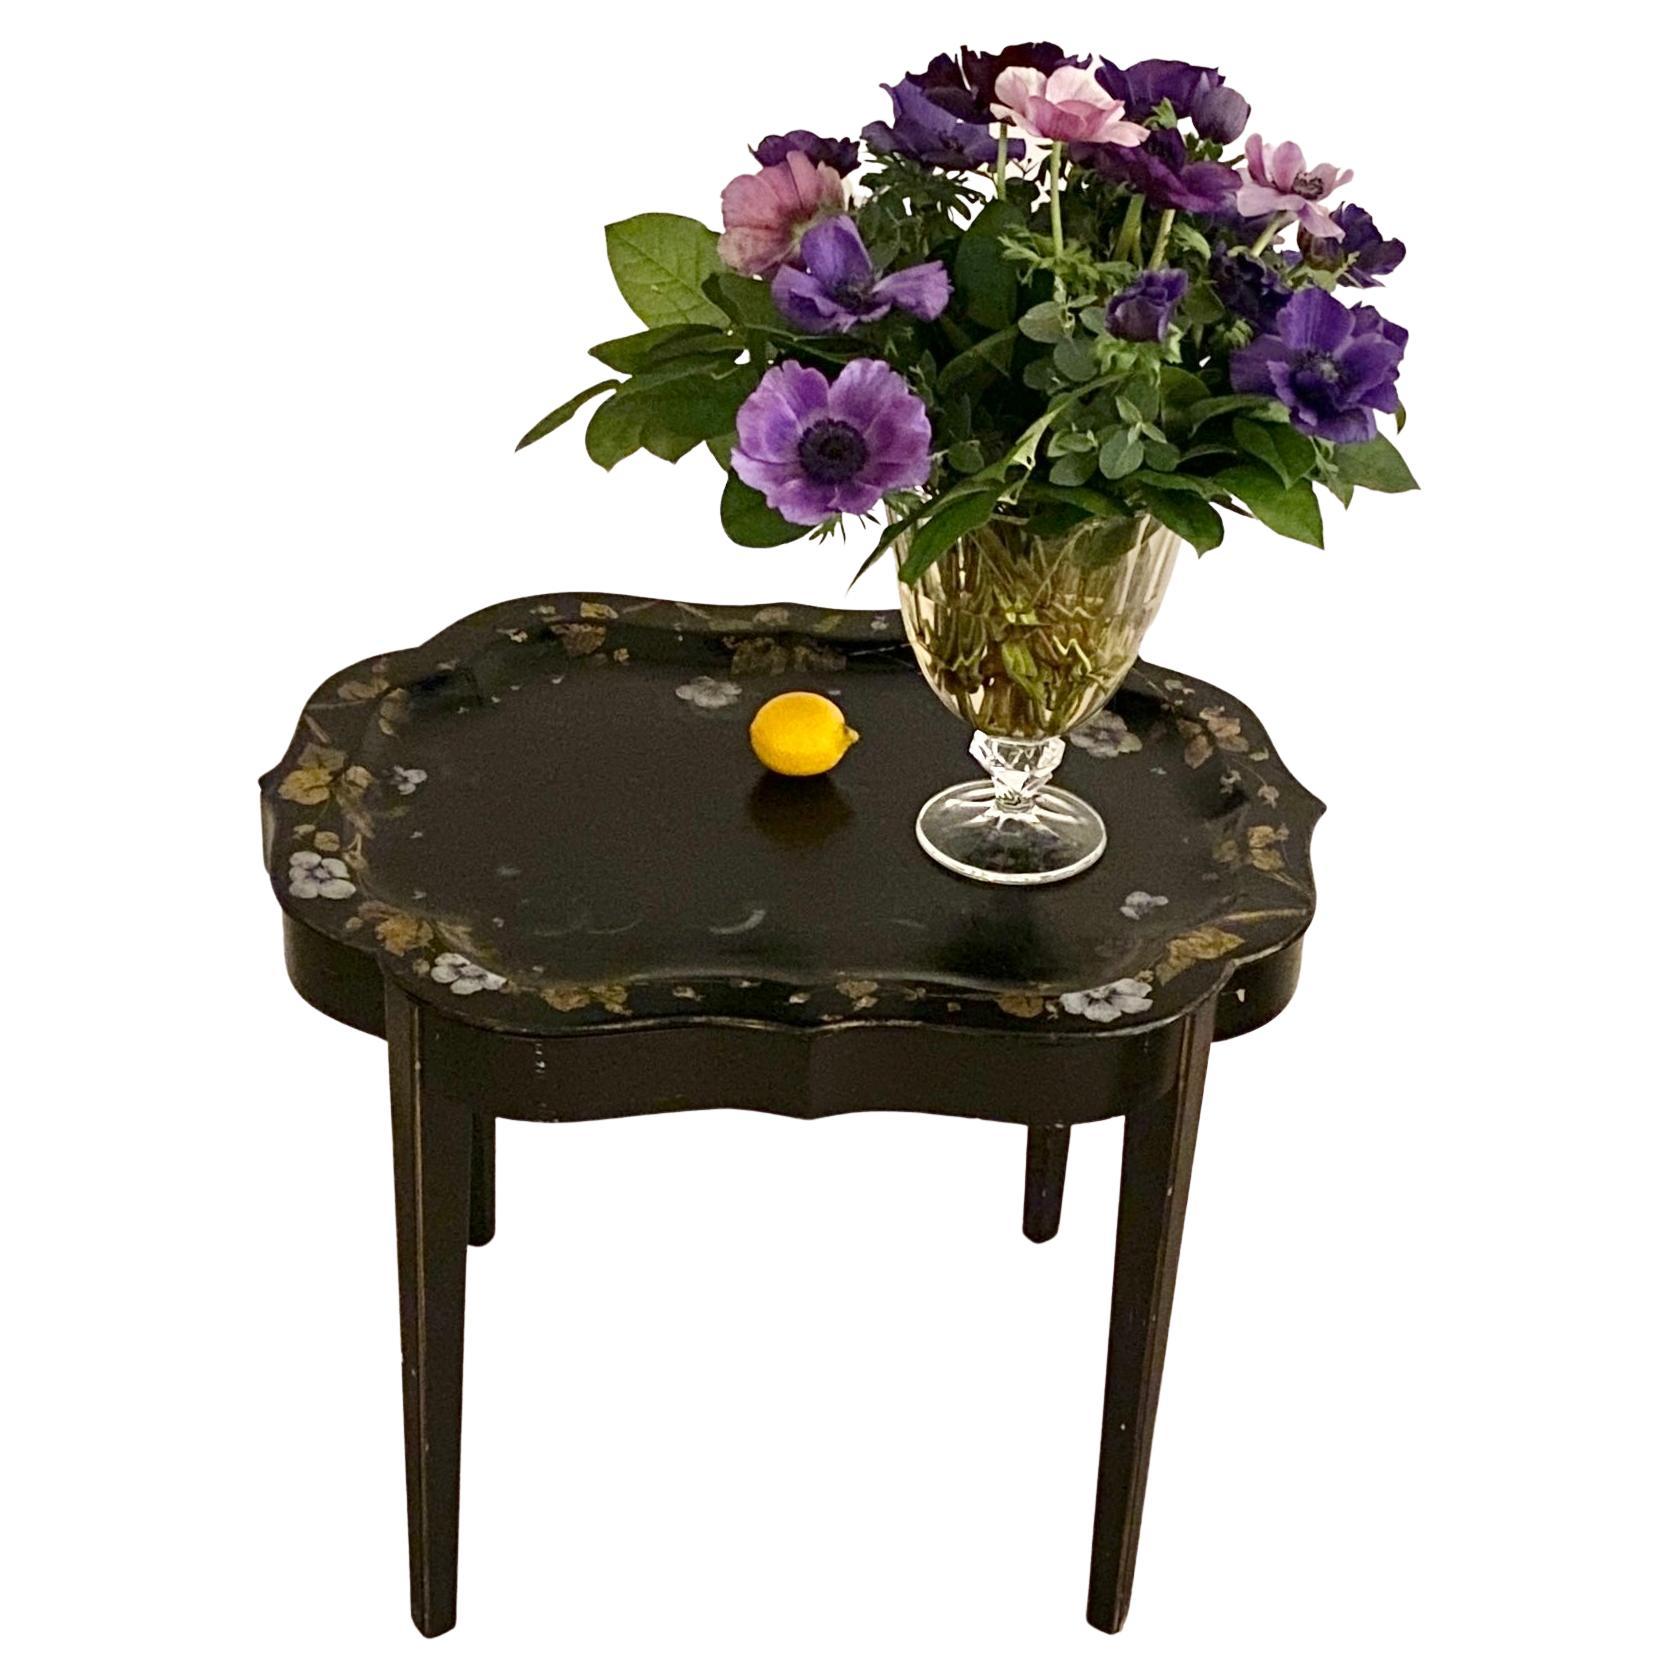 Danish Black-Painted Flower Decorated Coffee Tray Table, circa 1920s In Good Condition For Sale In Haddonfield, NJ